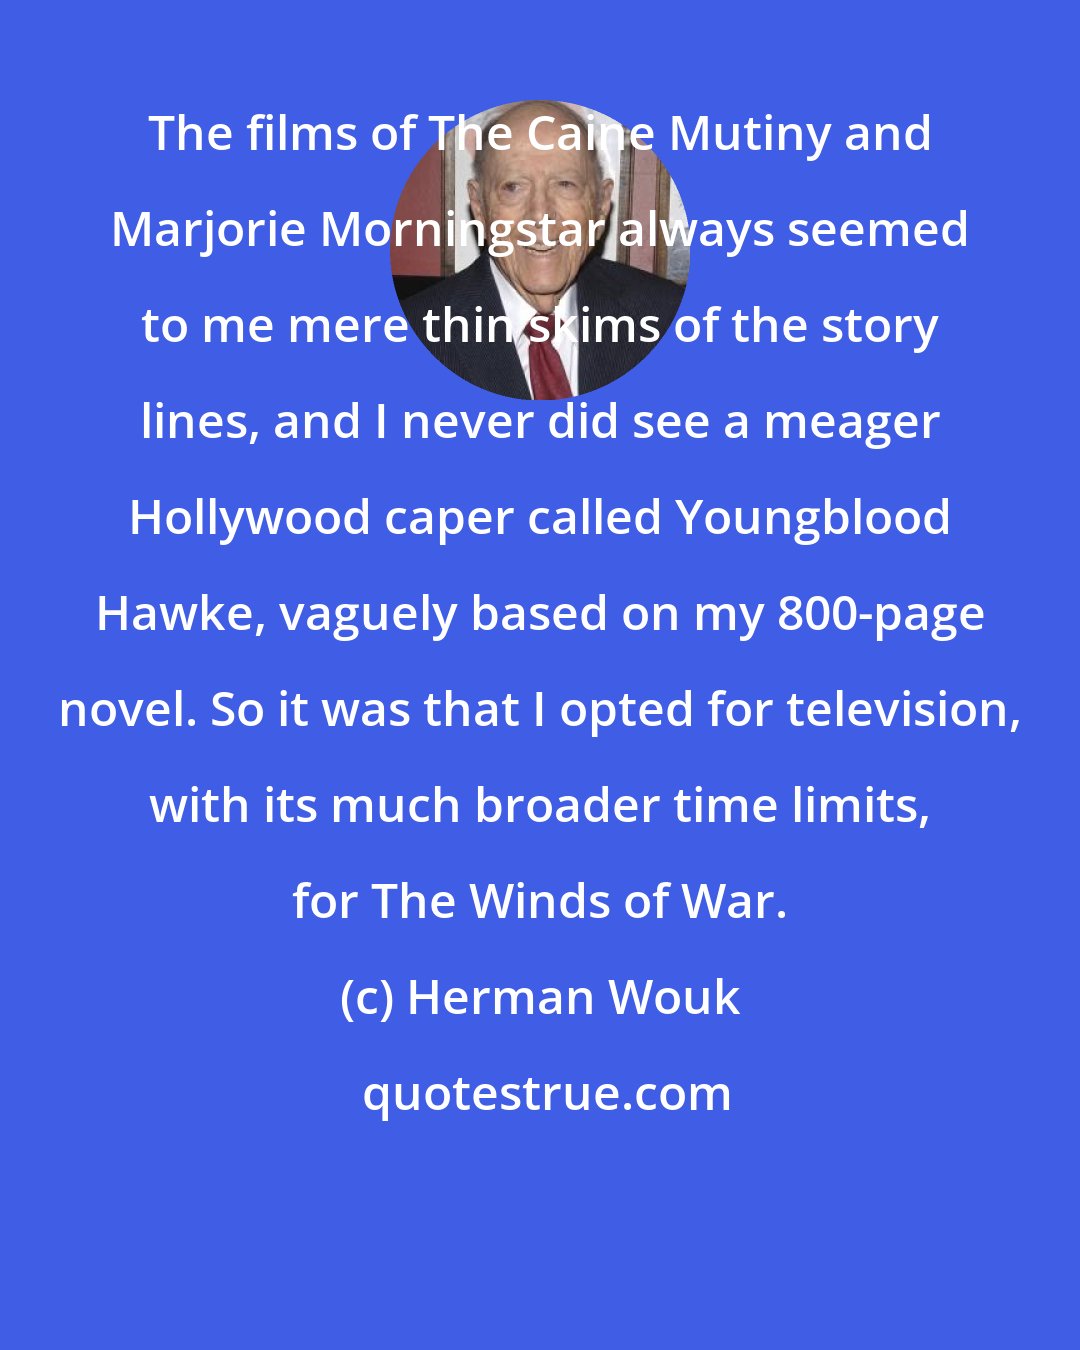 Herman Wouk: The films of The Caine Mutiny and Marjorie Morningstar always seemed to me mere thin skims of the story lines, and I never did see a meager Hollywood caper called Youngblood Hawke, vaguely based on my 800-page novel. So it was that I opted for television, with its much broader time limits, for The Winds of War.